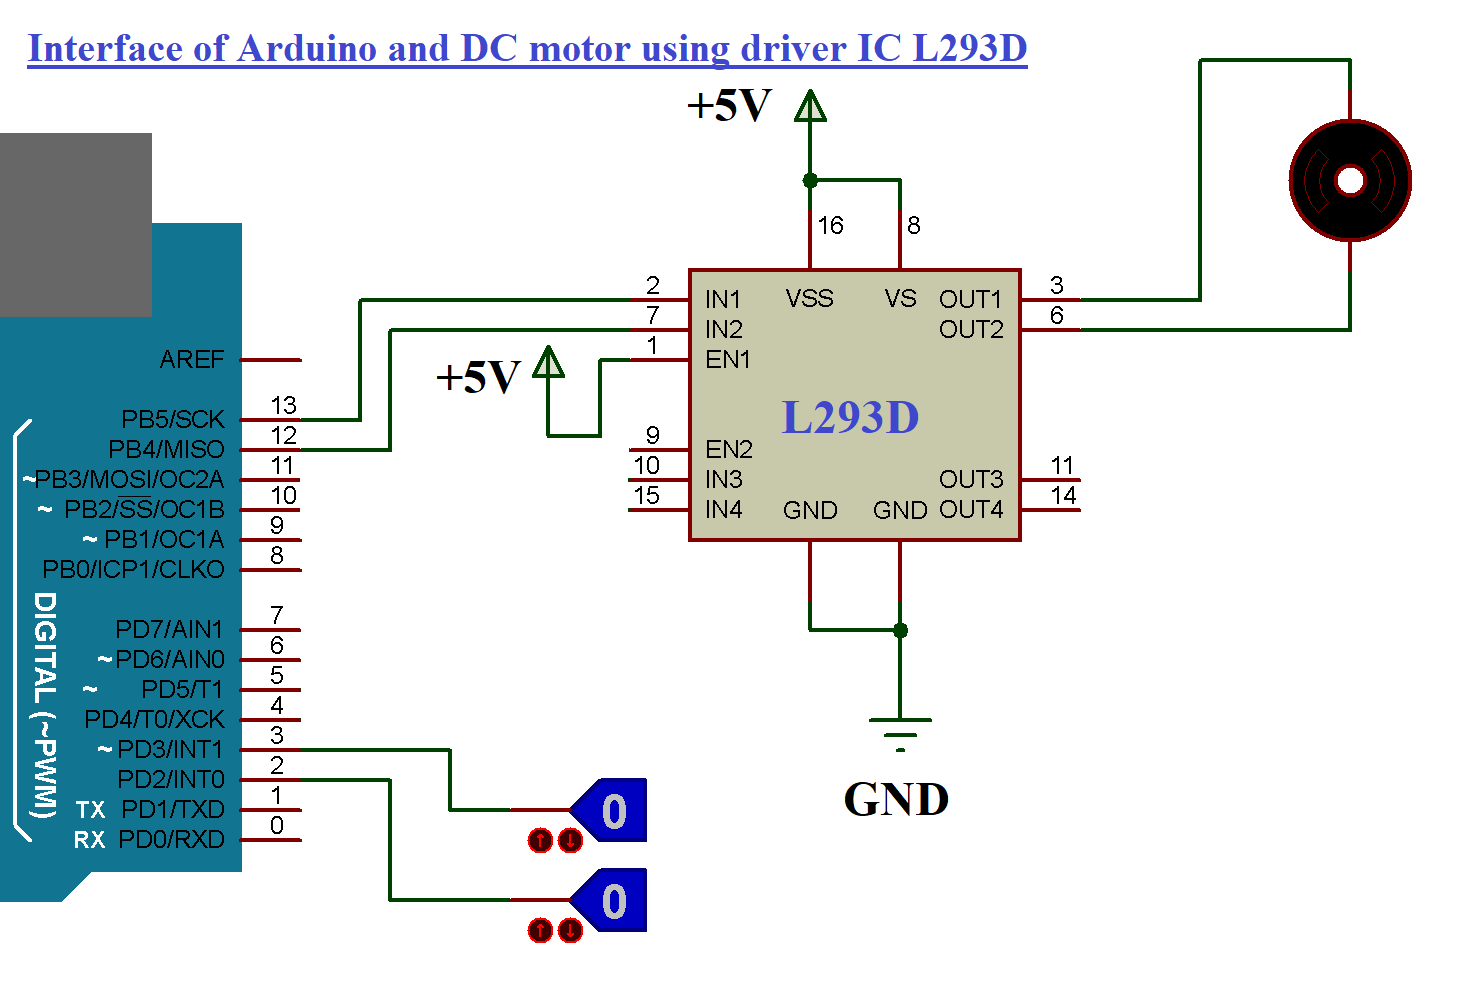 INTERFACE OF ARDUINO AND DC MOTOR USING DRIVER IC L293D